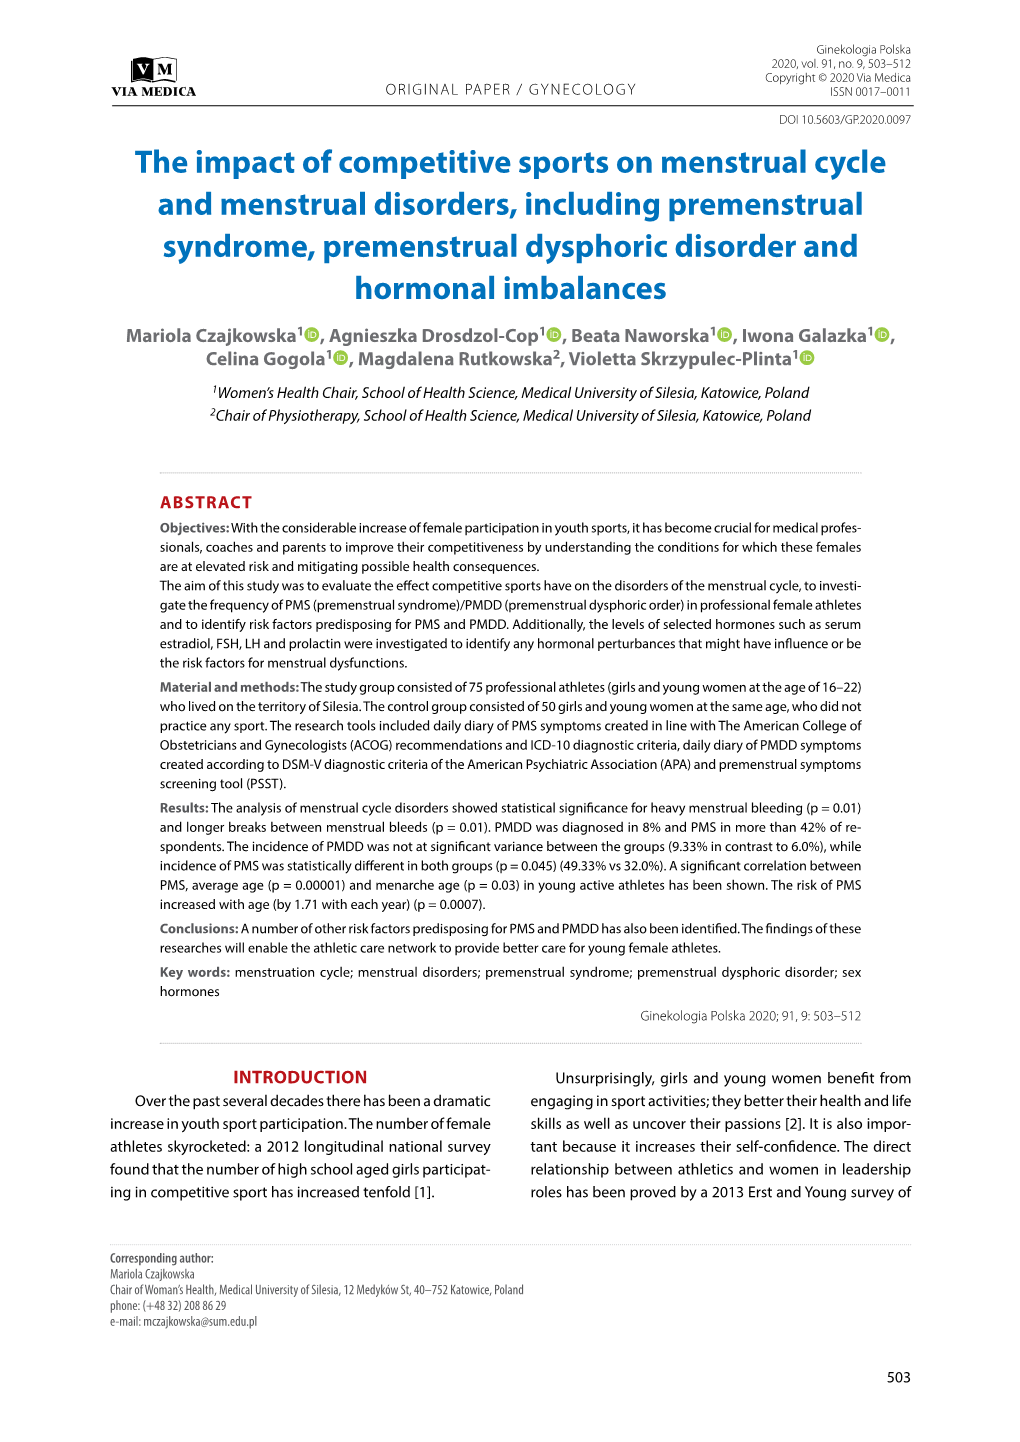 The Impact of Competitive Sports on Menstrual Cycle and Menstrual Disorders, Including Premenstrual Syndrome, Premenstrual Dysphoric Disorder and Hormonal Imbalances